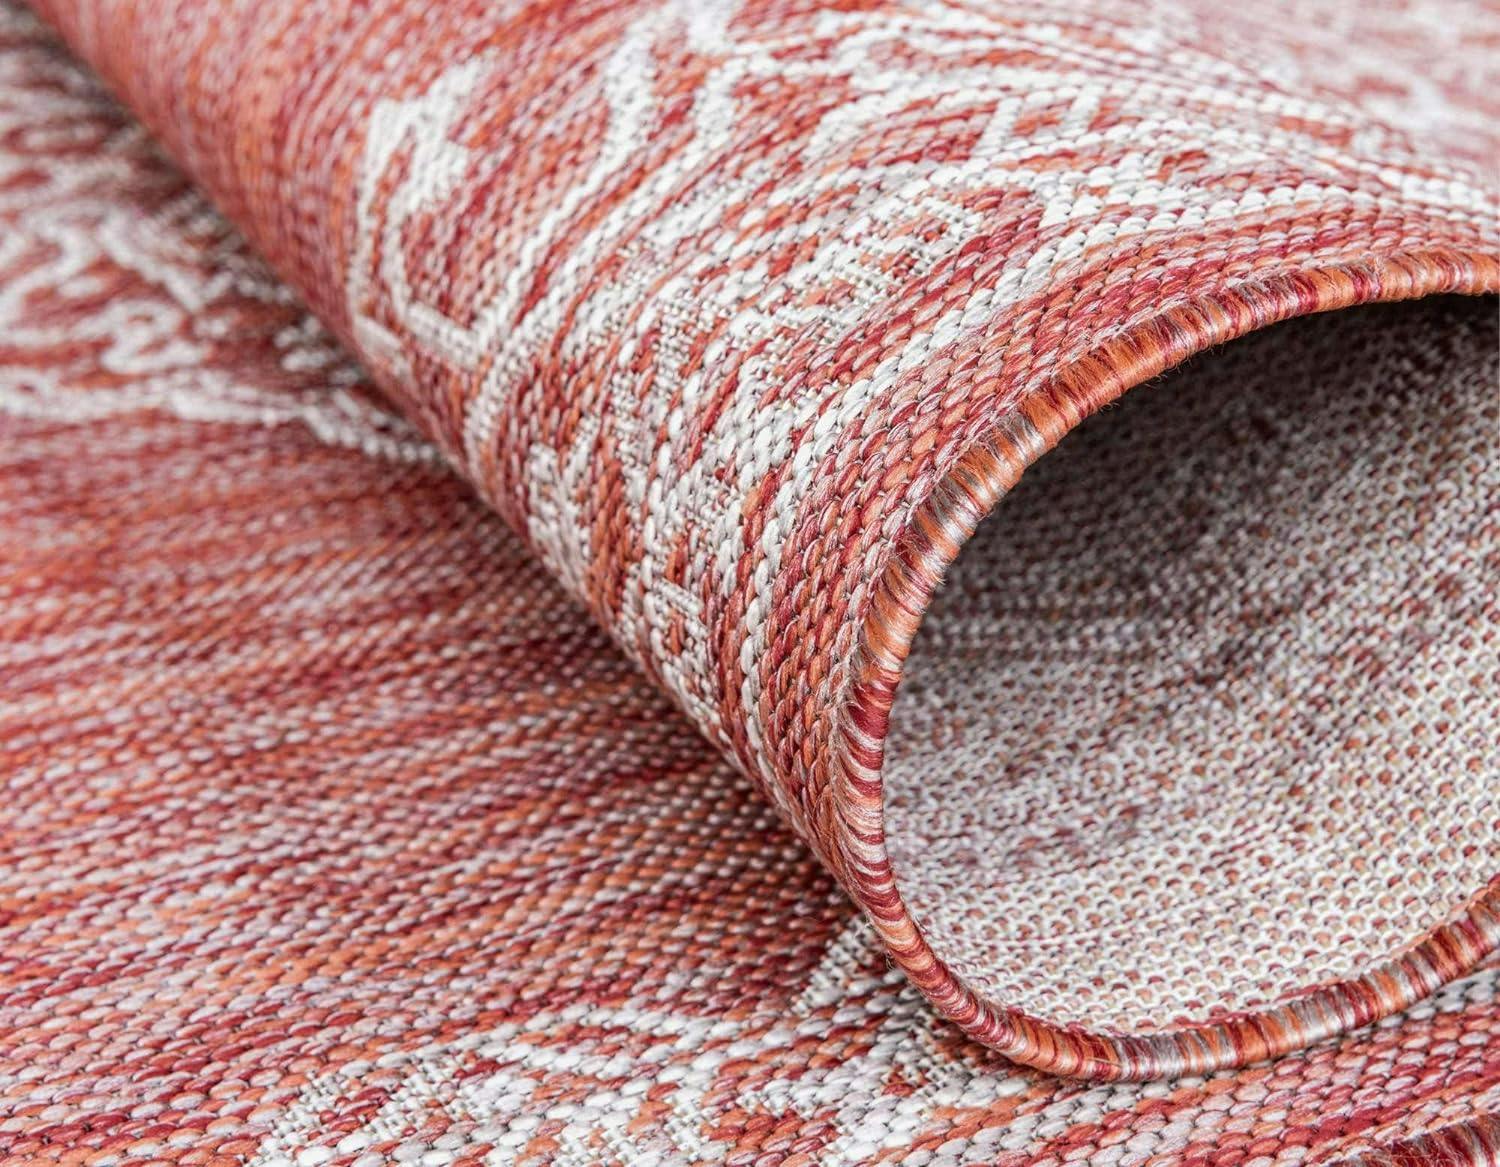 Rustic Rust Red 9' x 12' Synthetic Outdoor Area Rug